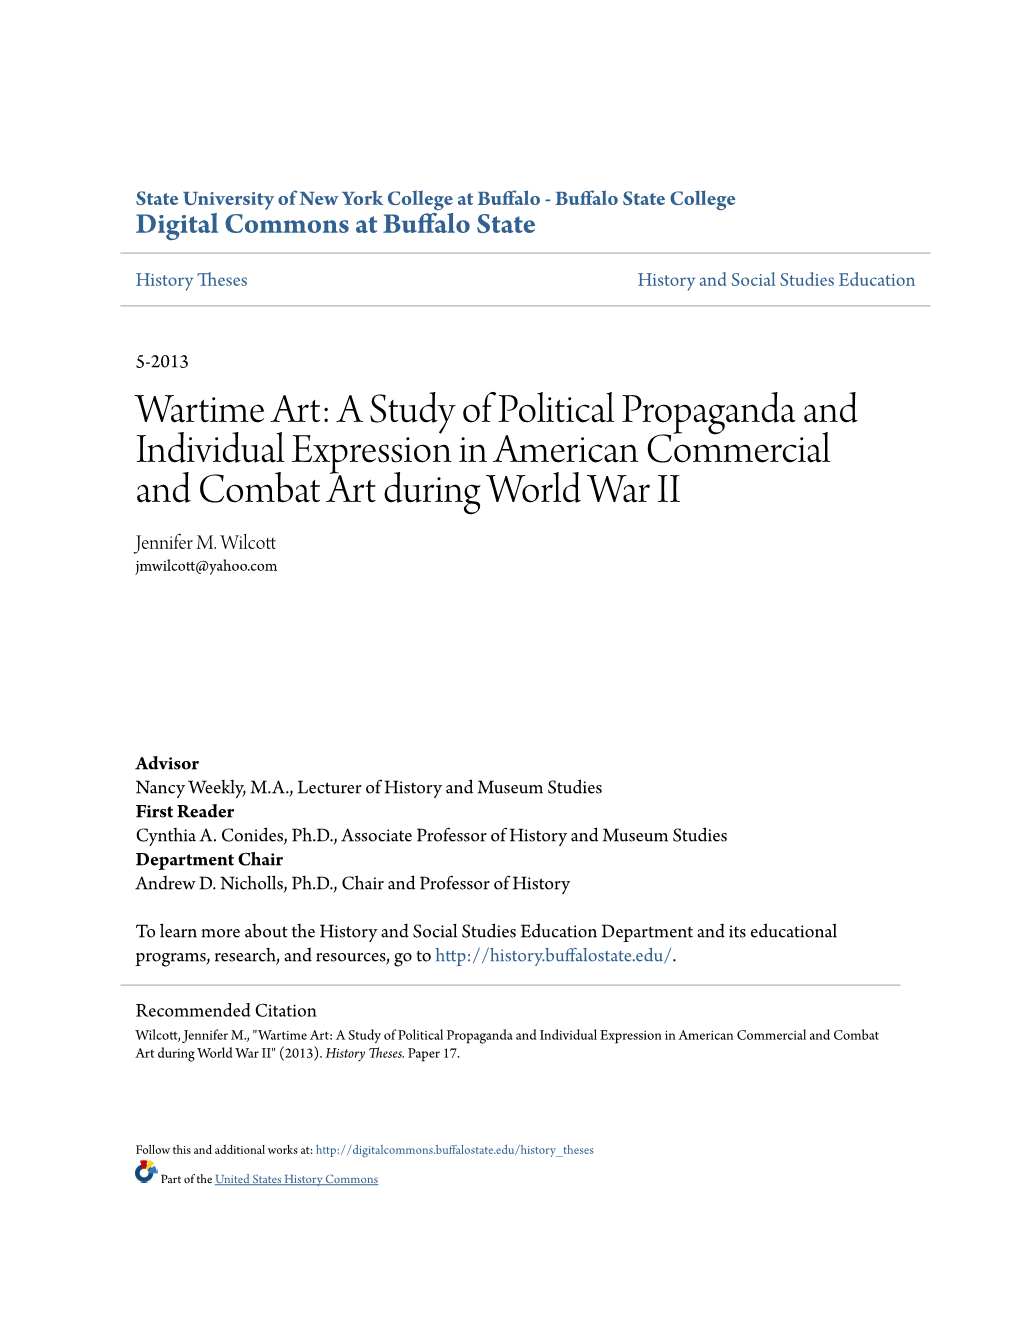 Wartime Art: a Study of Political Propaganda and Individual Expression in American Commercial and Combat Art During World War II Jennifer M